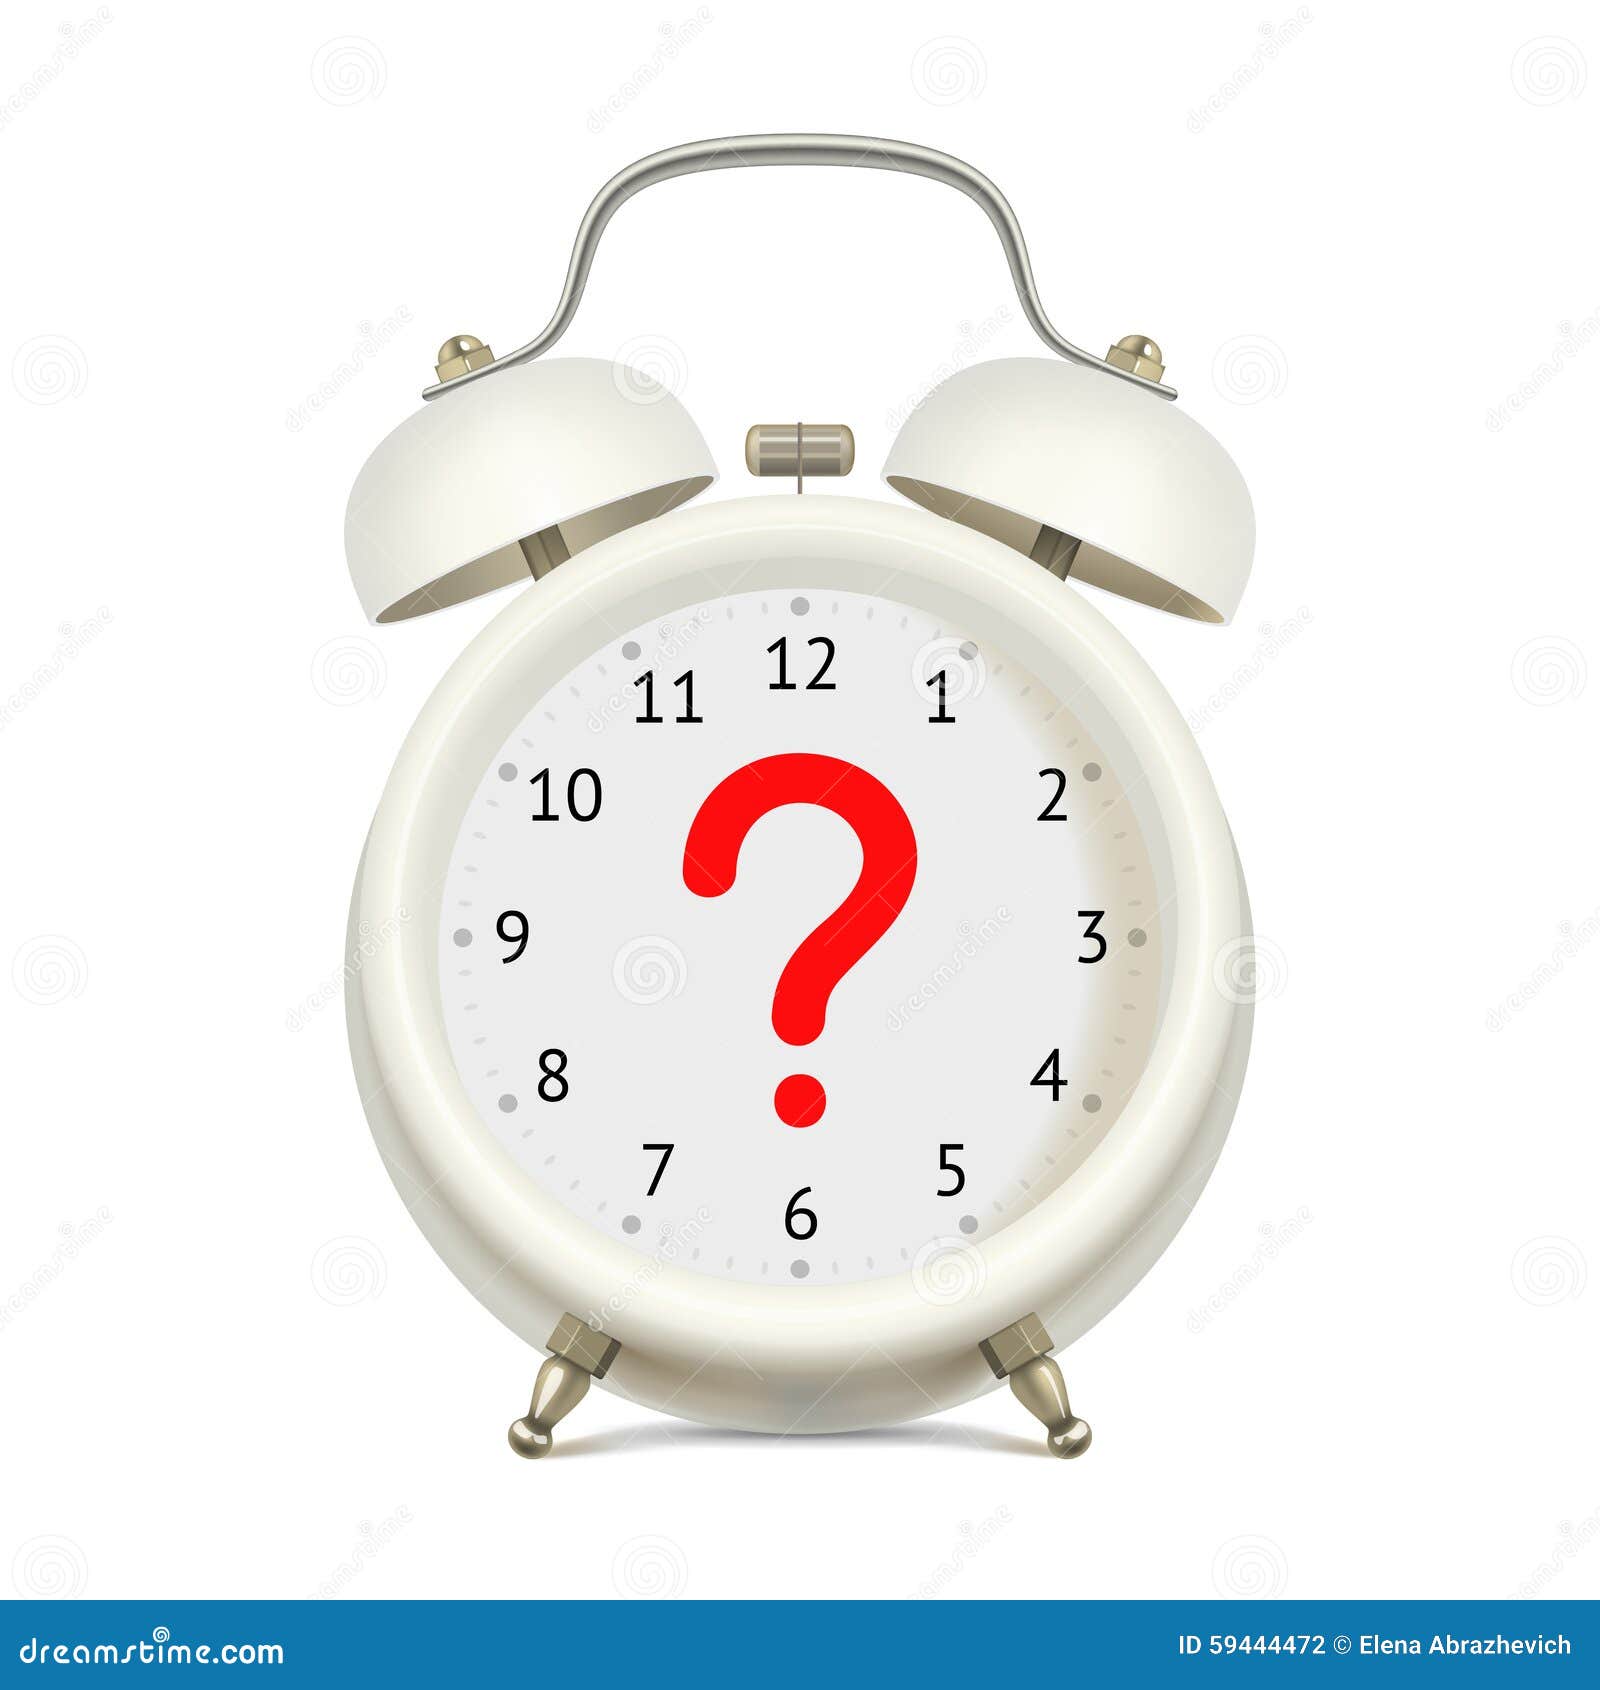 alarm-clock-question-mark-realistic-white-digits-face-red-center-white-background-uncertainty-59444472.jpg